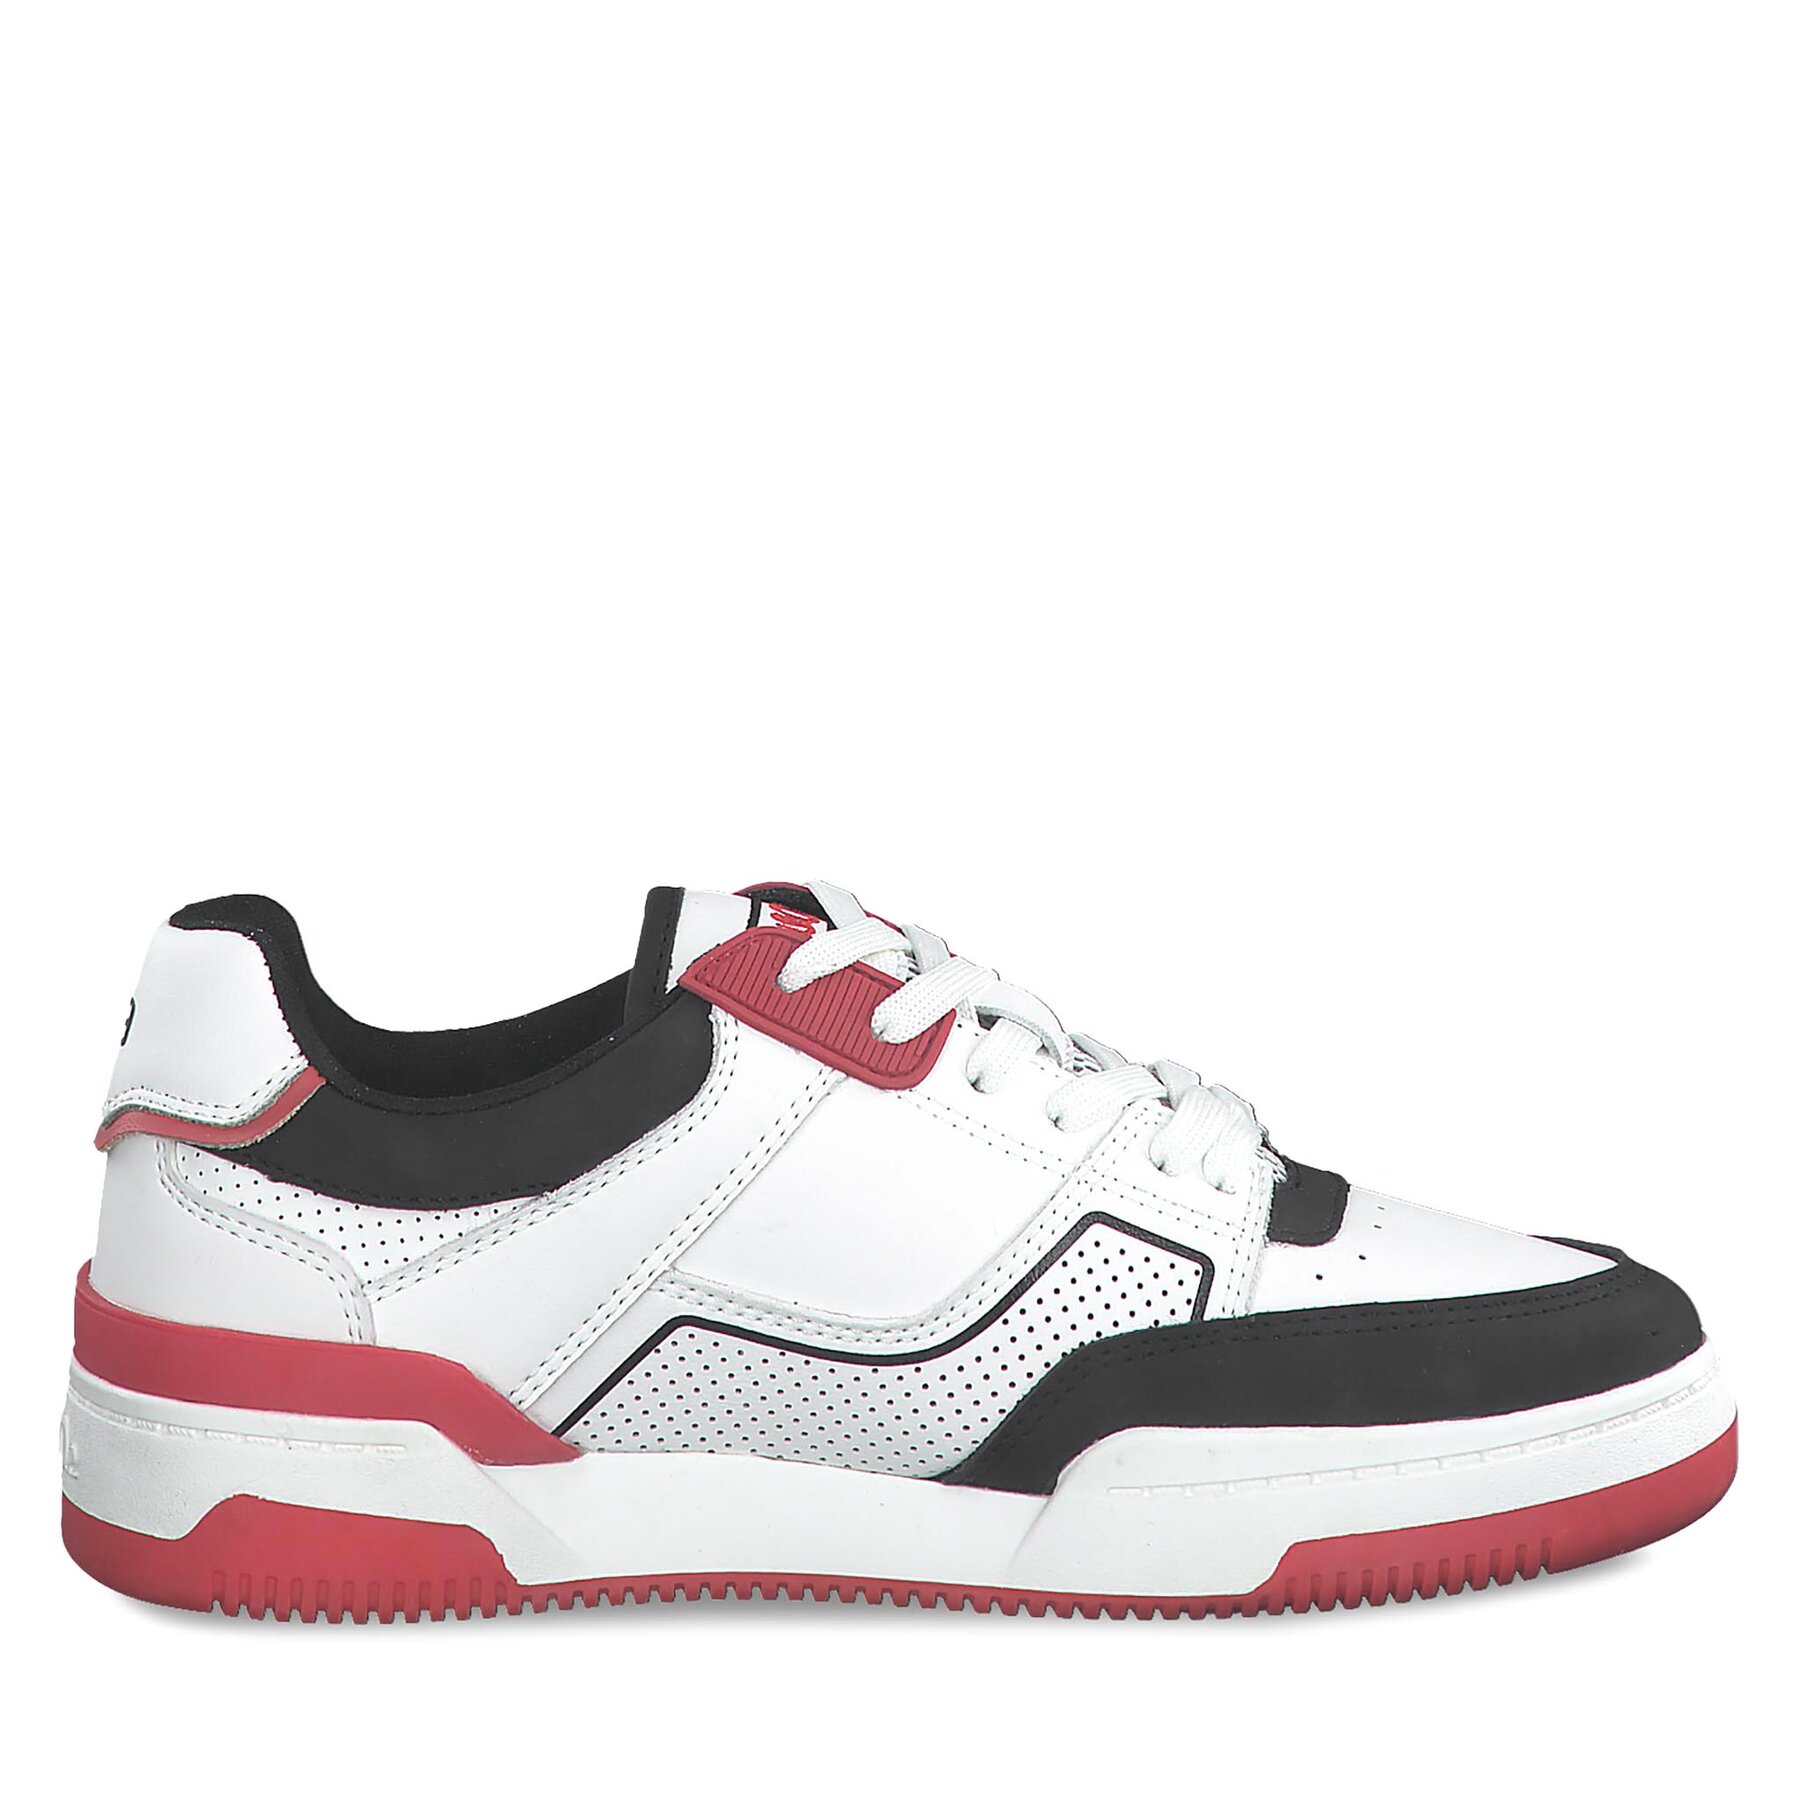 Sneakers s.Oliver 5-23632-30 White/Red Comb 152 von s.Oliver